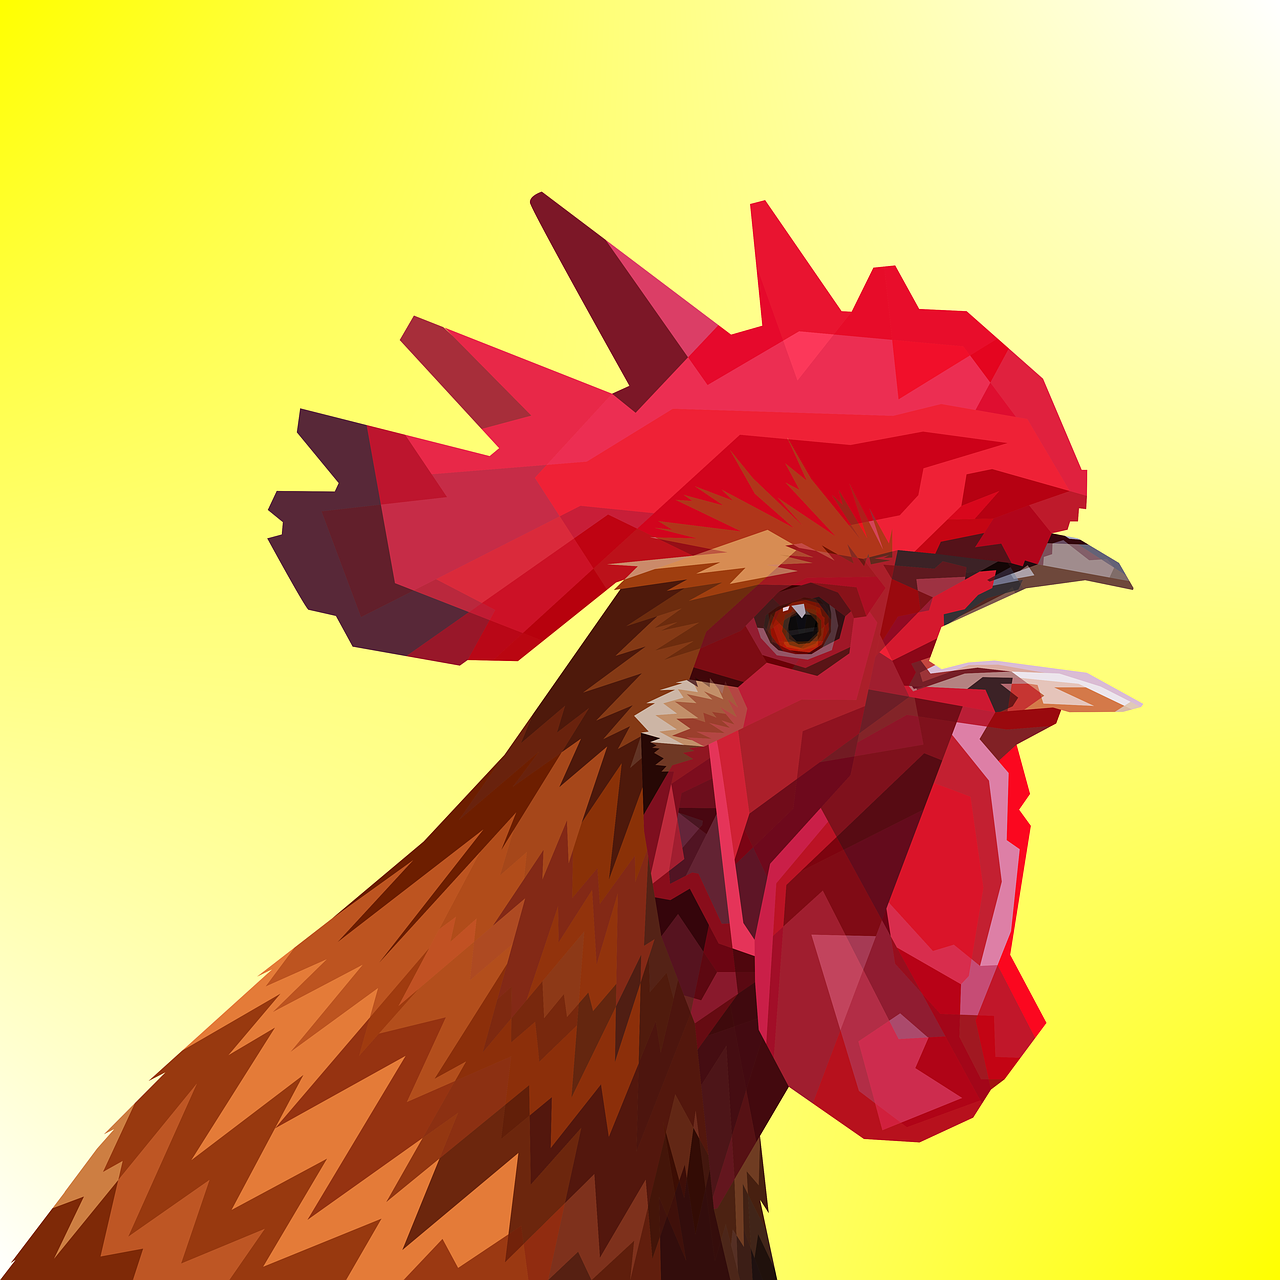 a close up of a rooster's head on a yellow background, vector art, shutterstock, cubism, low poly 3d model, red skinned, low polygons illustration